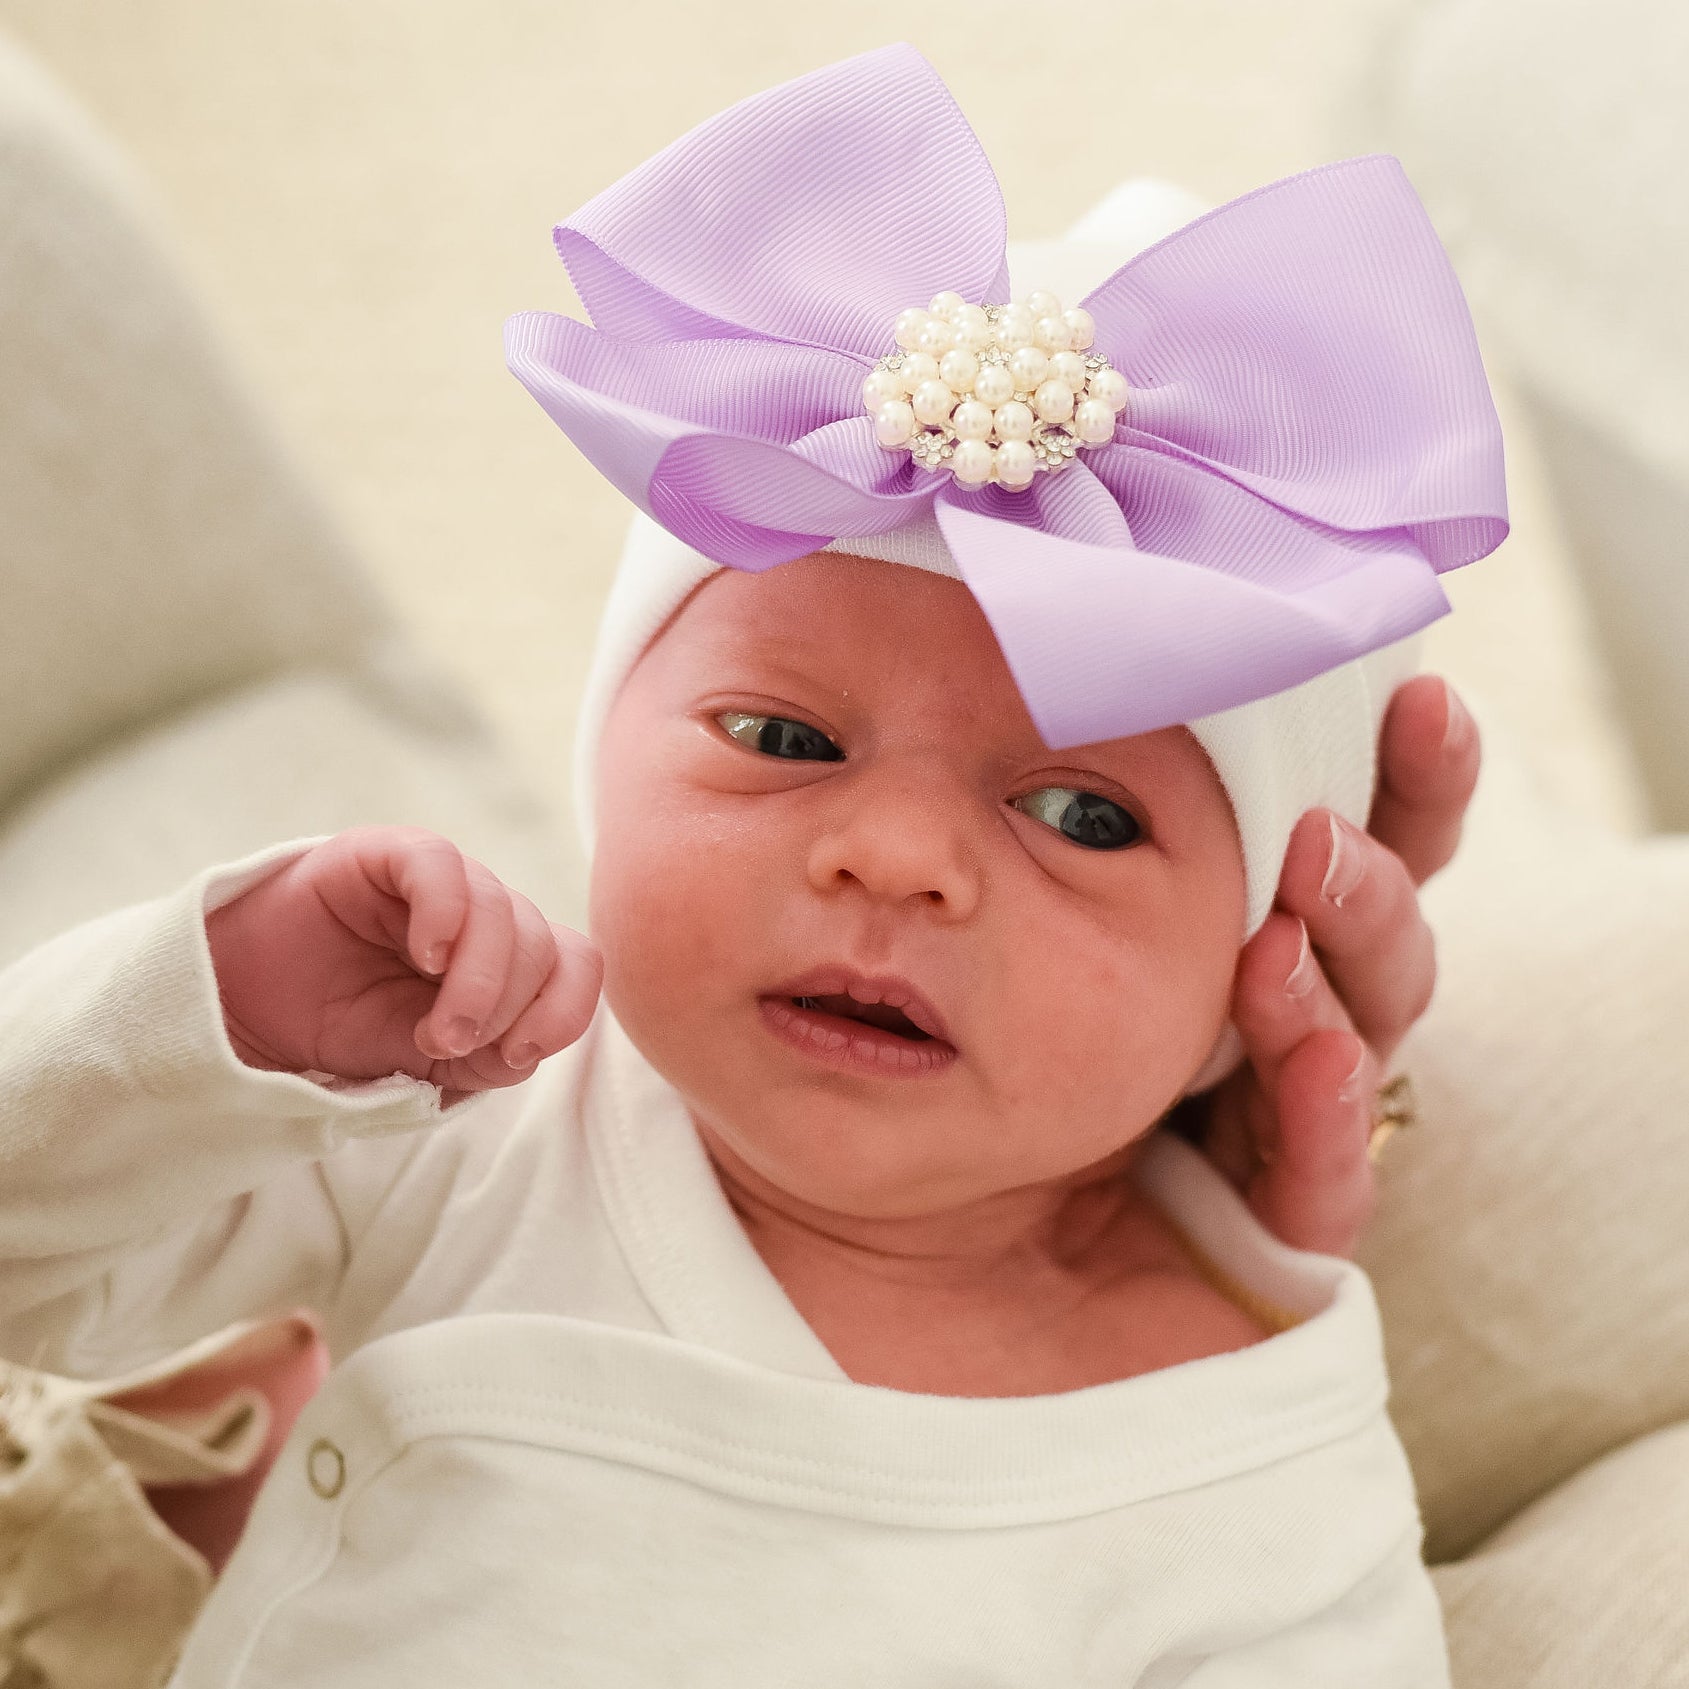 Violet Pearl Bow Newborn Girl Hospital Hat - White Hat with Purple Ribbon Bow